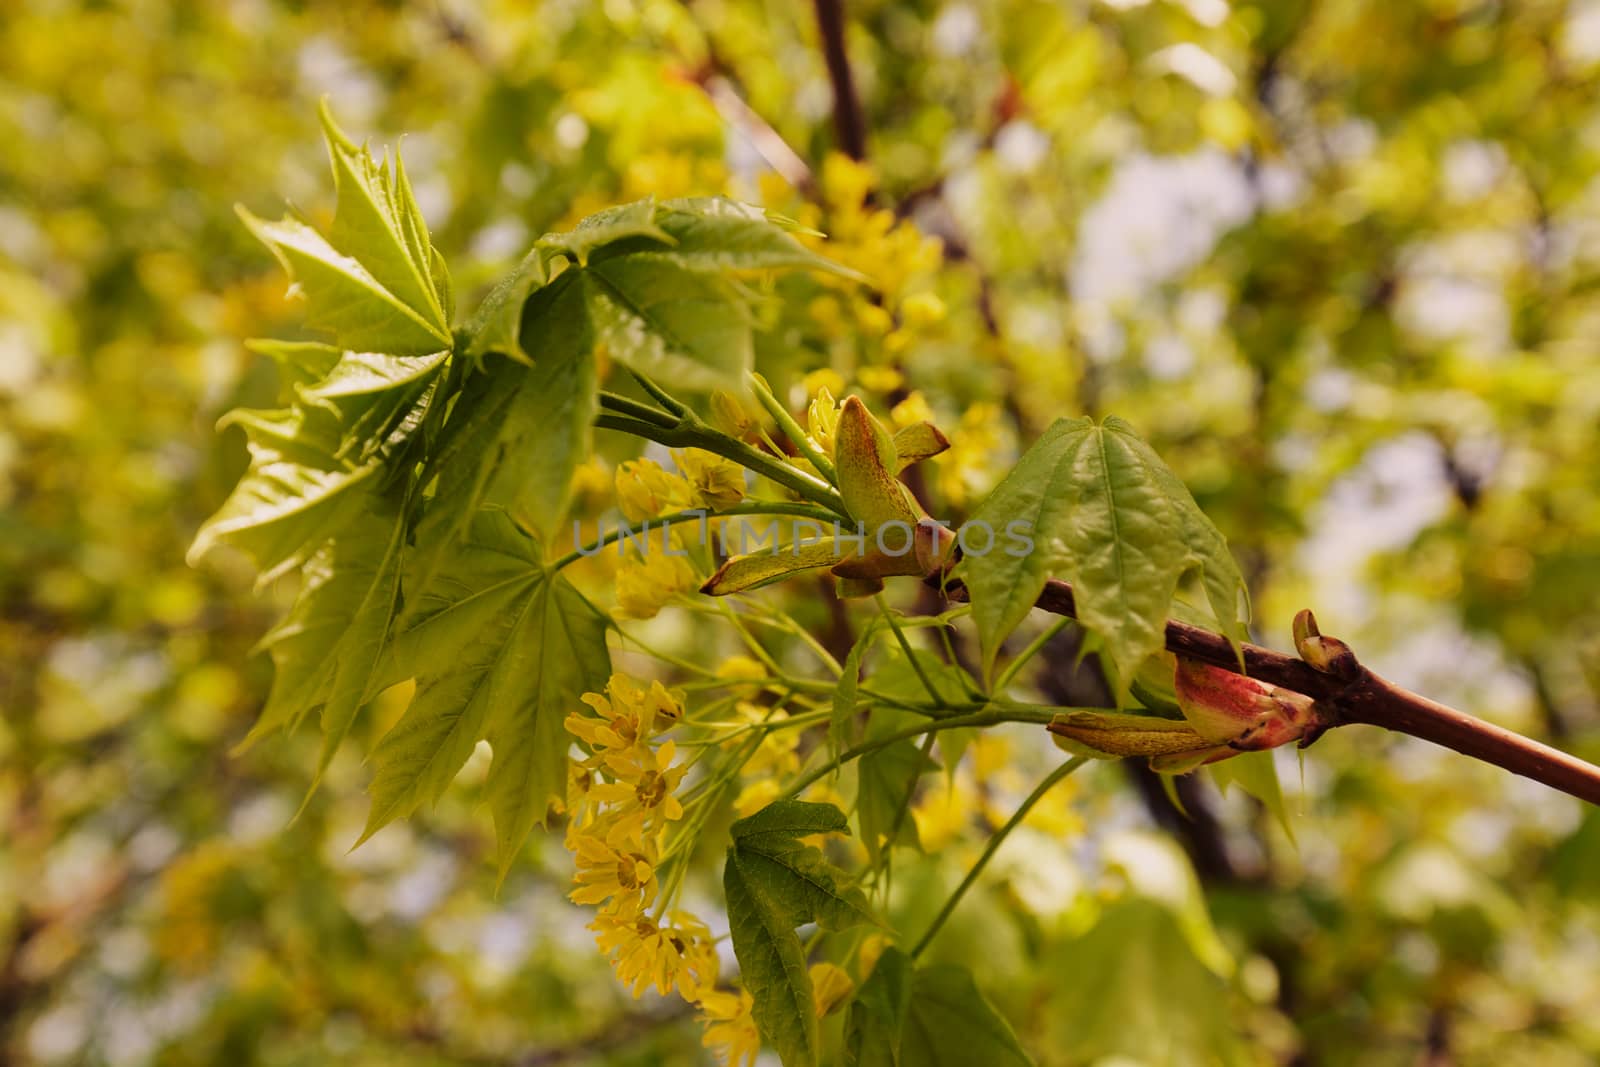 linden tree in bloom, note shallow depth of field